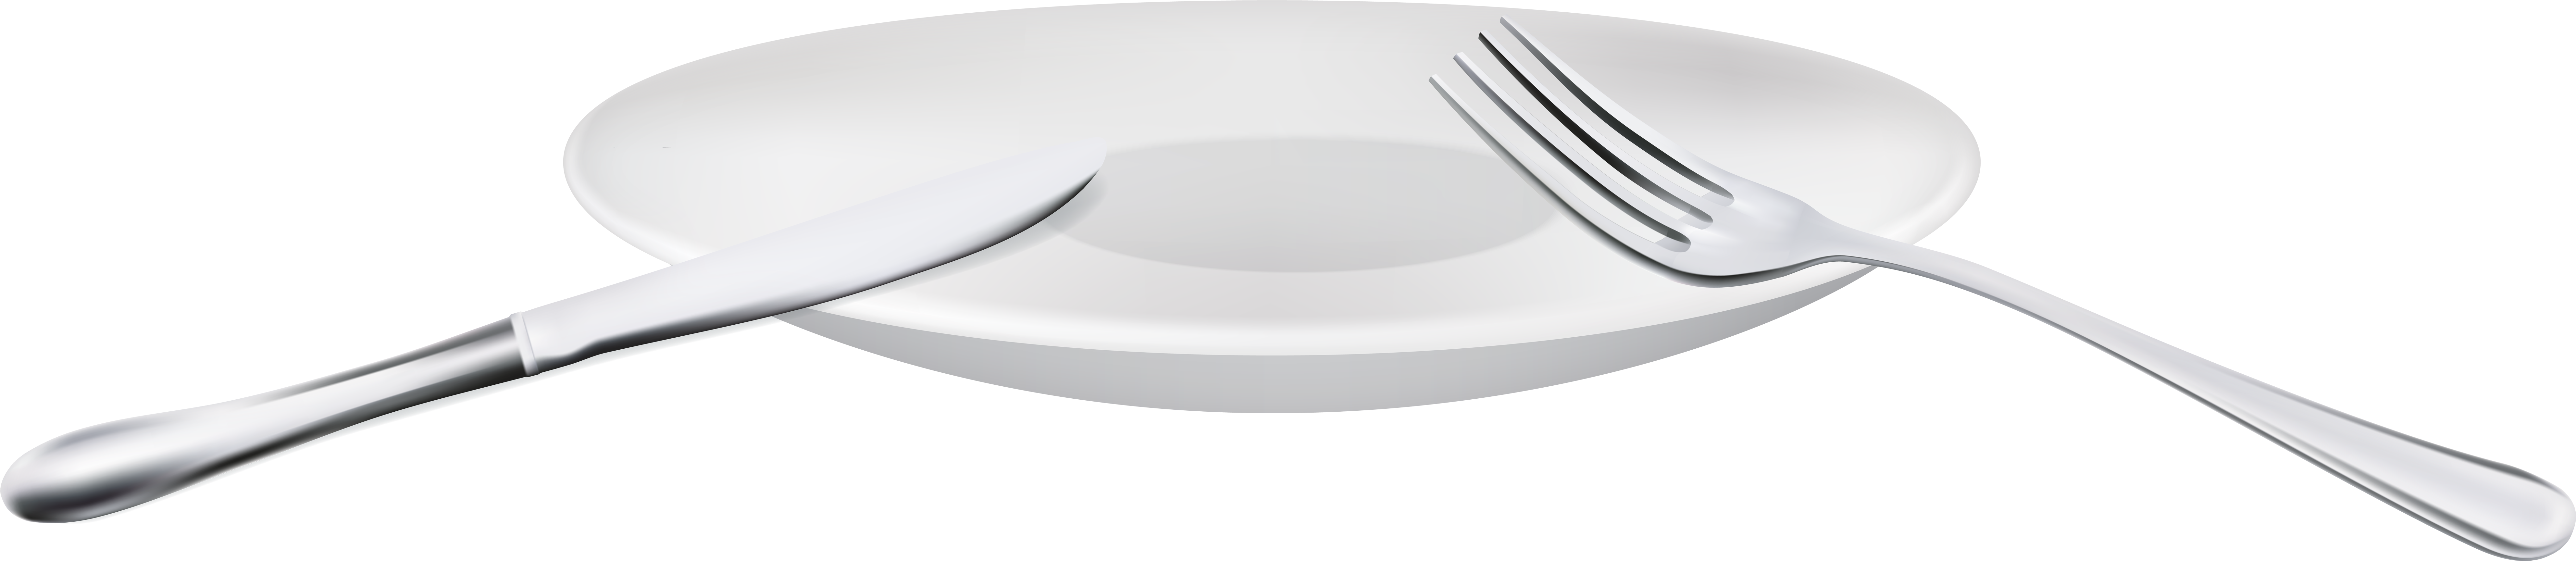 Fork Spoon And Plate Png Clipart - Ceramic (8000x1793), Png Download